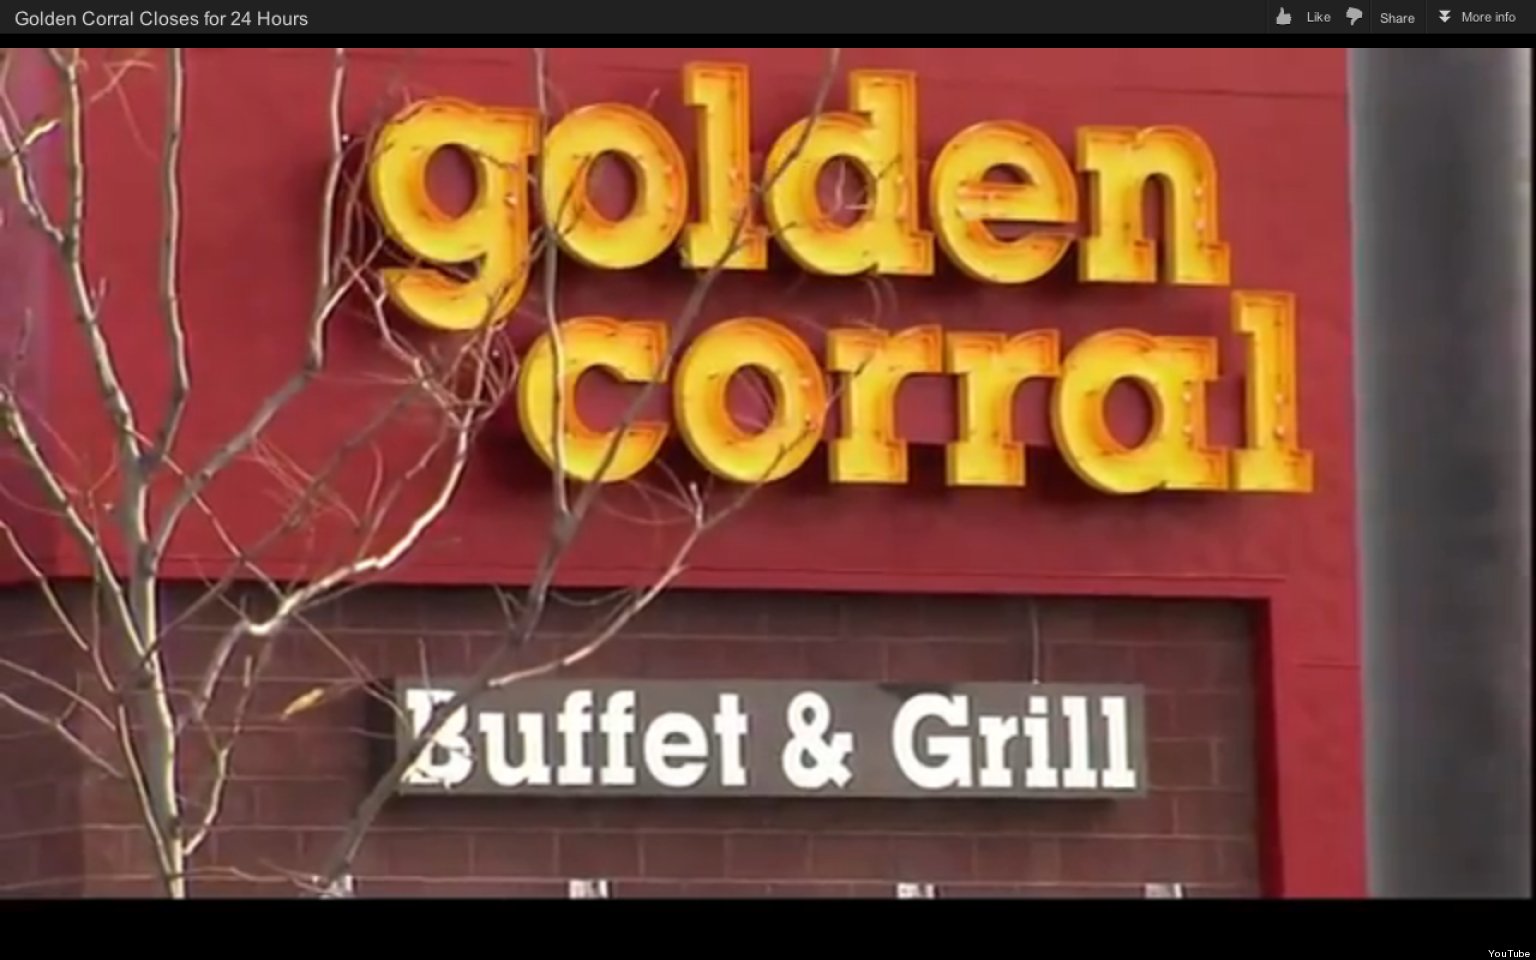 ... Golden Corral Coupons Buy One Get One Free , Golden Corral Coupons 50%